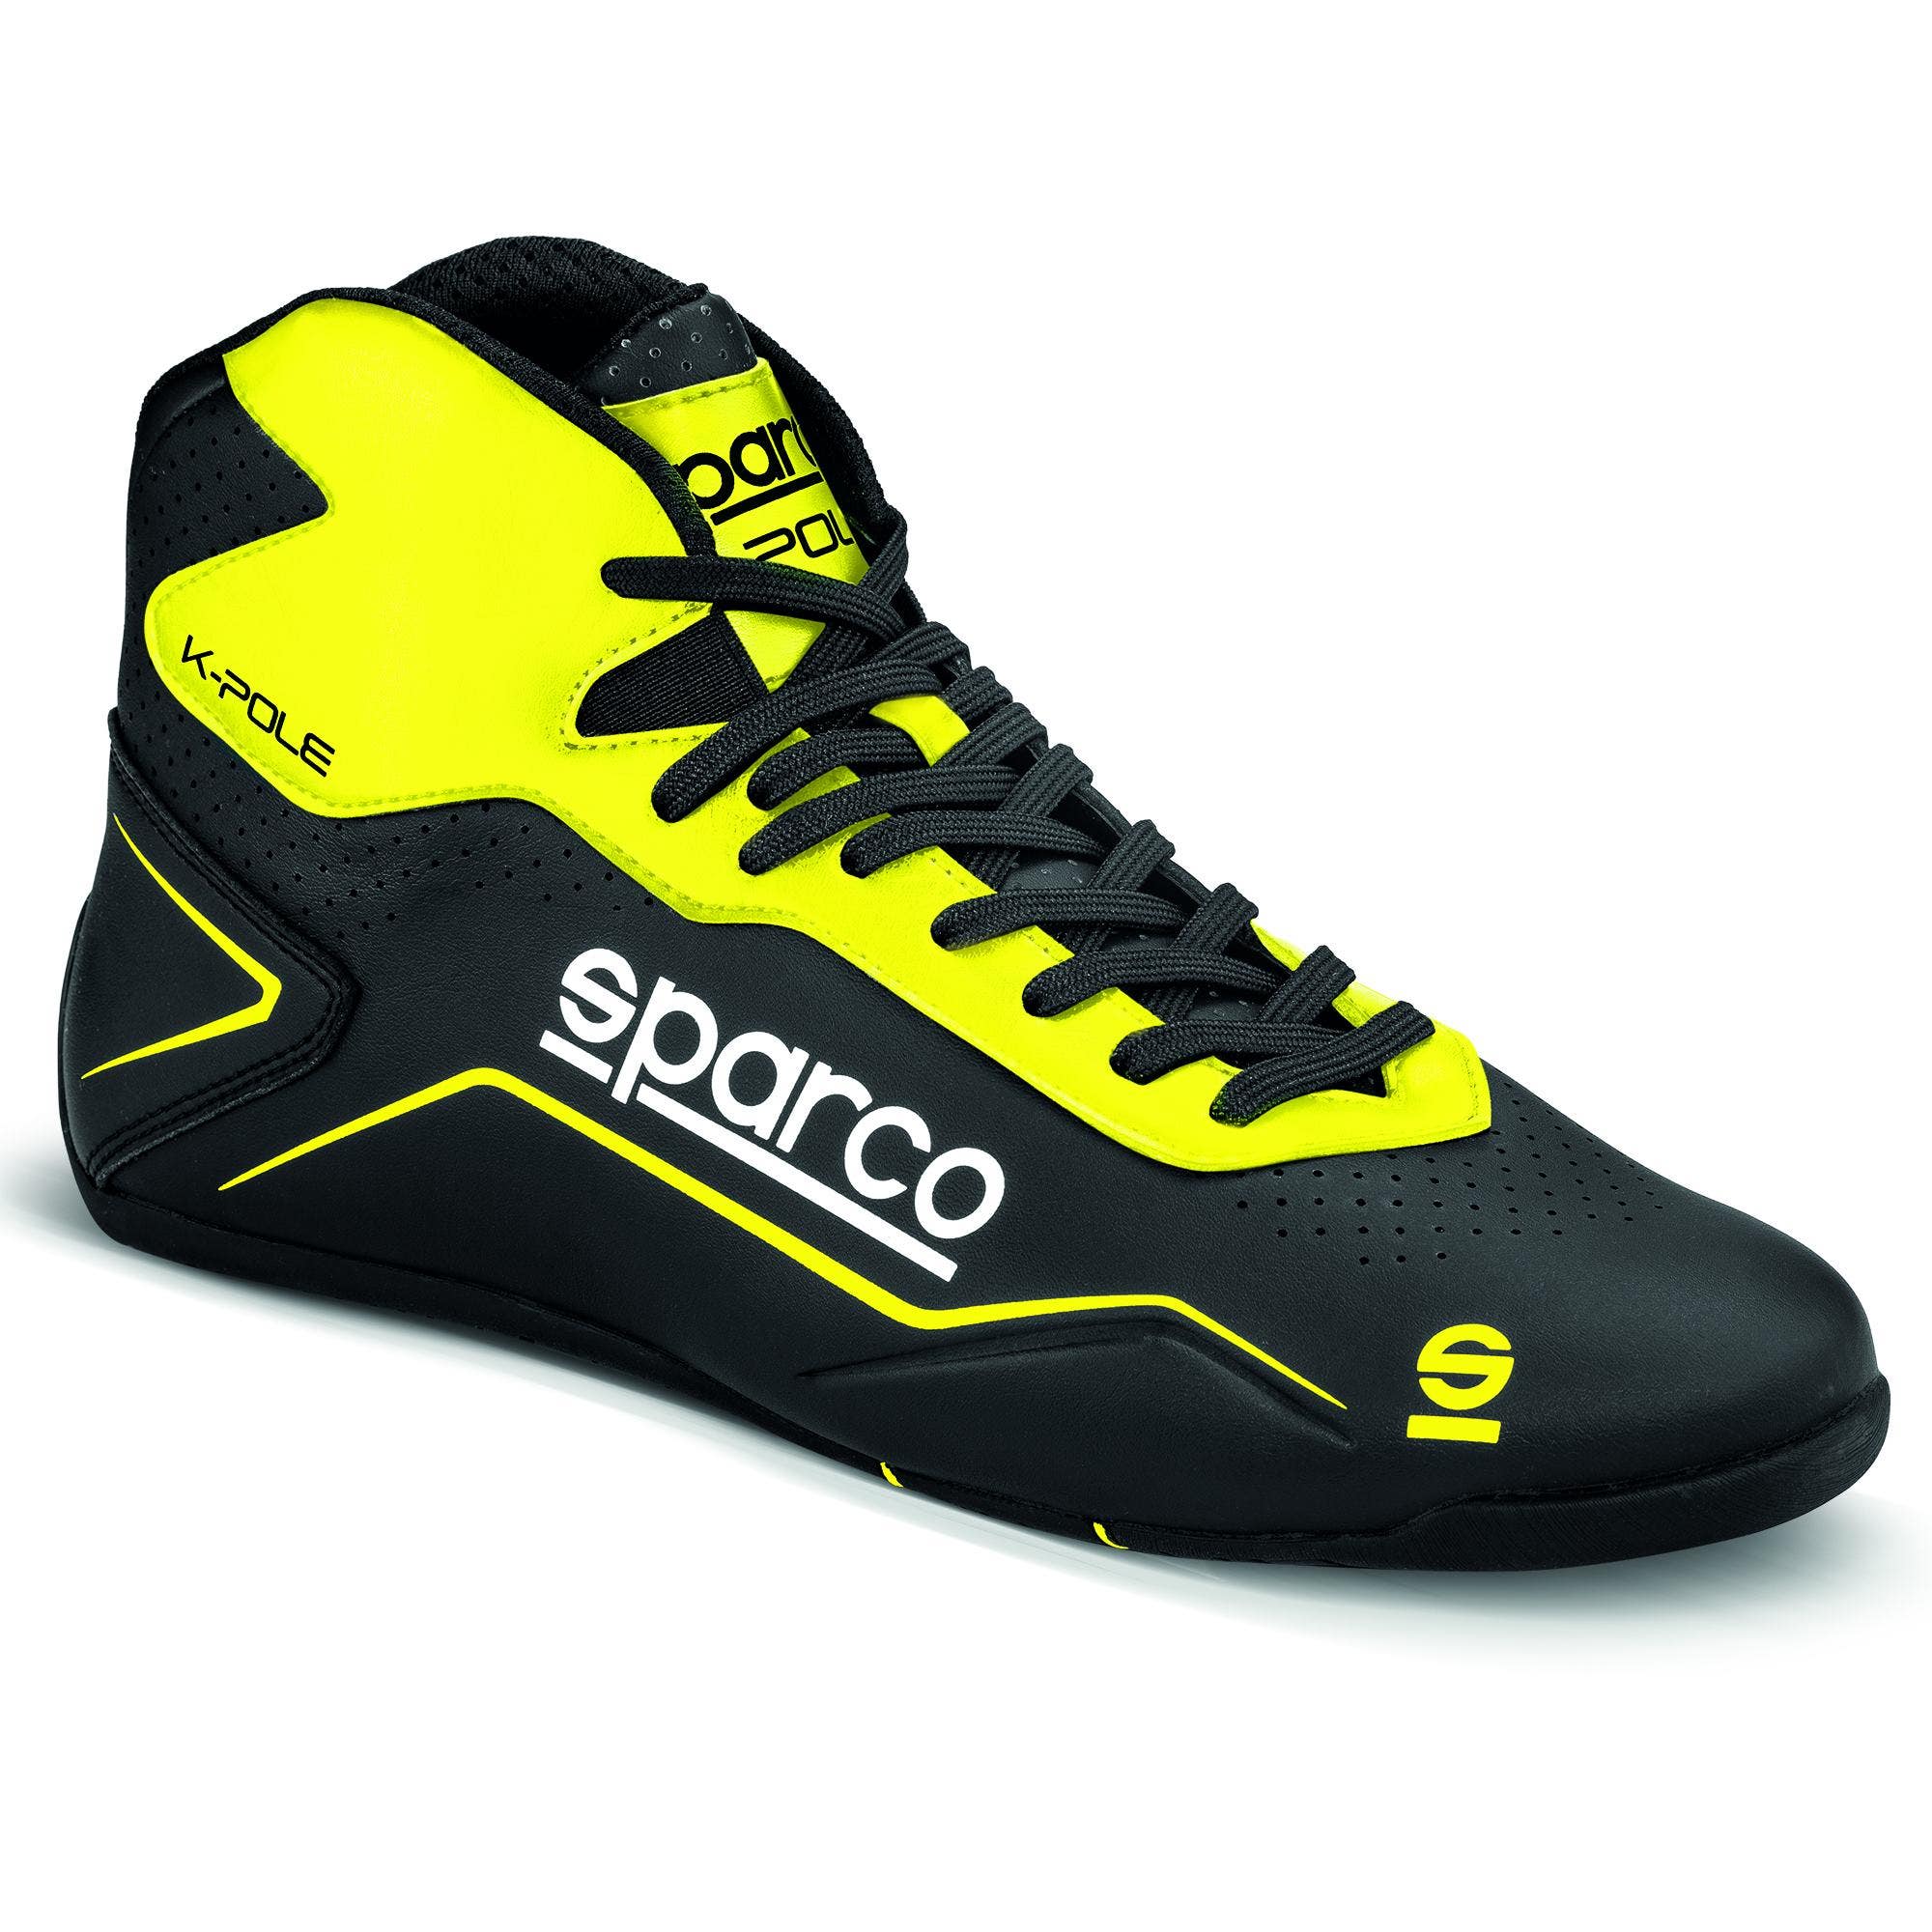 SPARCO S-DRIVE MARTINI RACING SHOES - rallystore.net